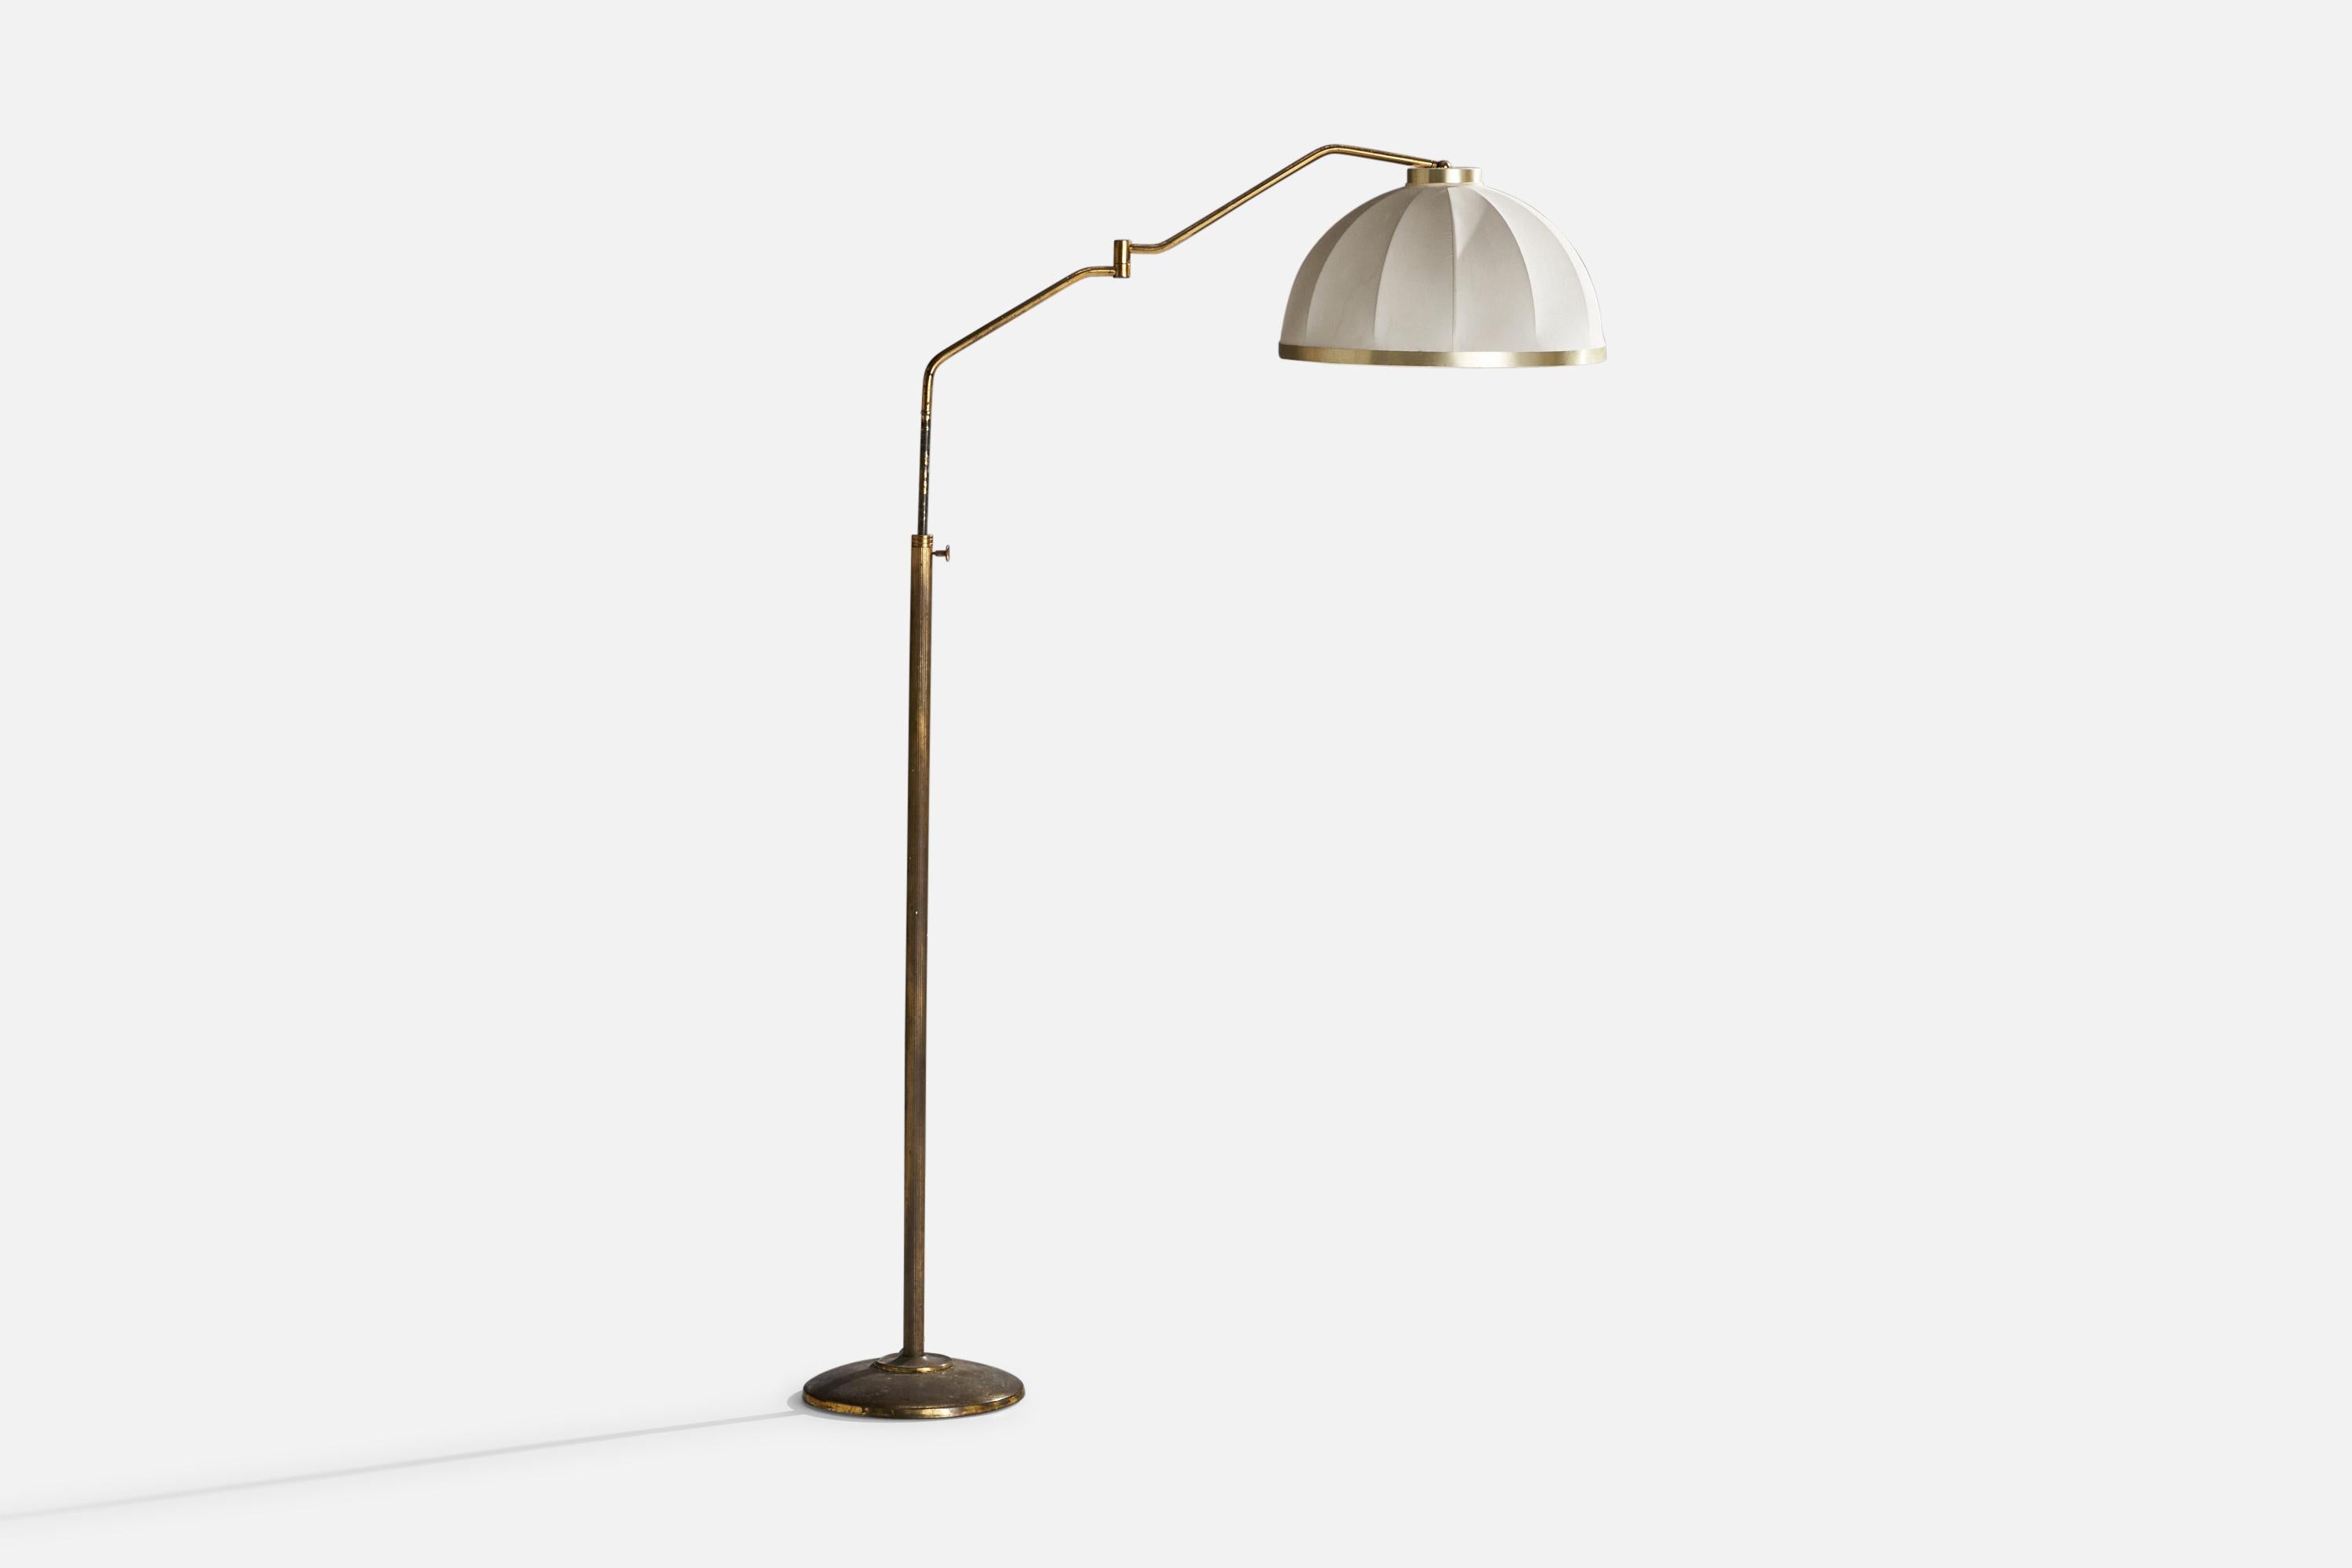 A brass and off-white fabric floor lamp designed and produced in Italy, c. 1940s.

Overall Dimensions (inches): 62” H x 17.8” W x 44.5” D
Dimensions variable based on position of light
Stated dimensions include shade.
Bulb Specifications: E-26